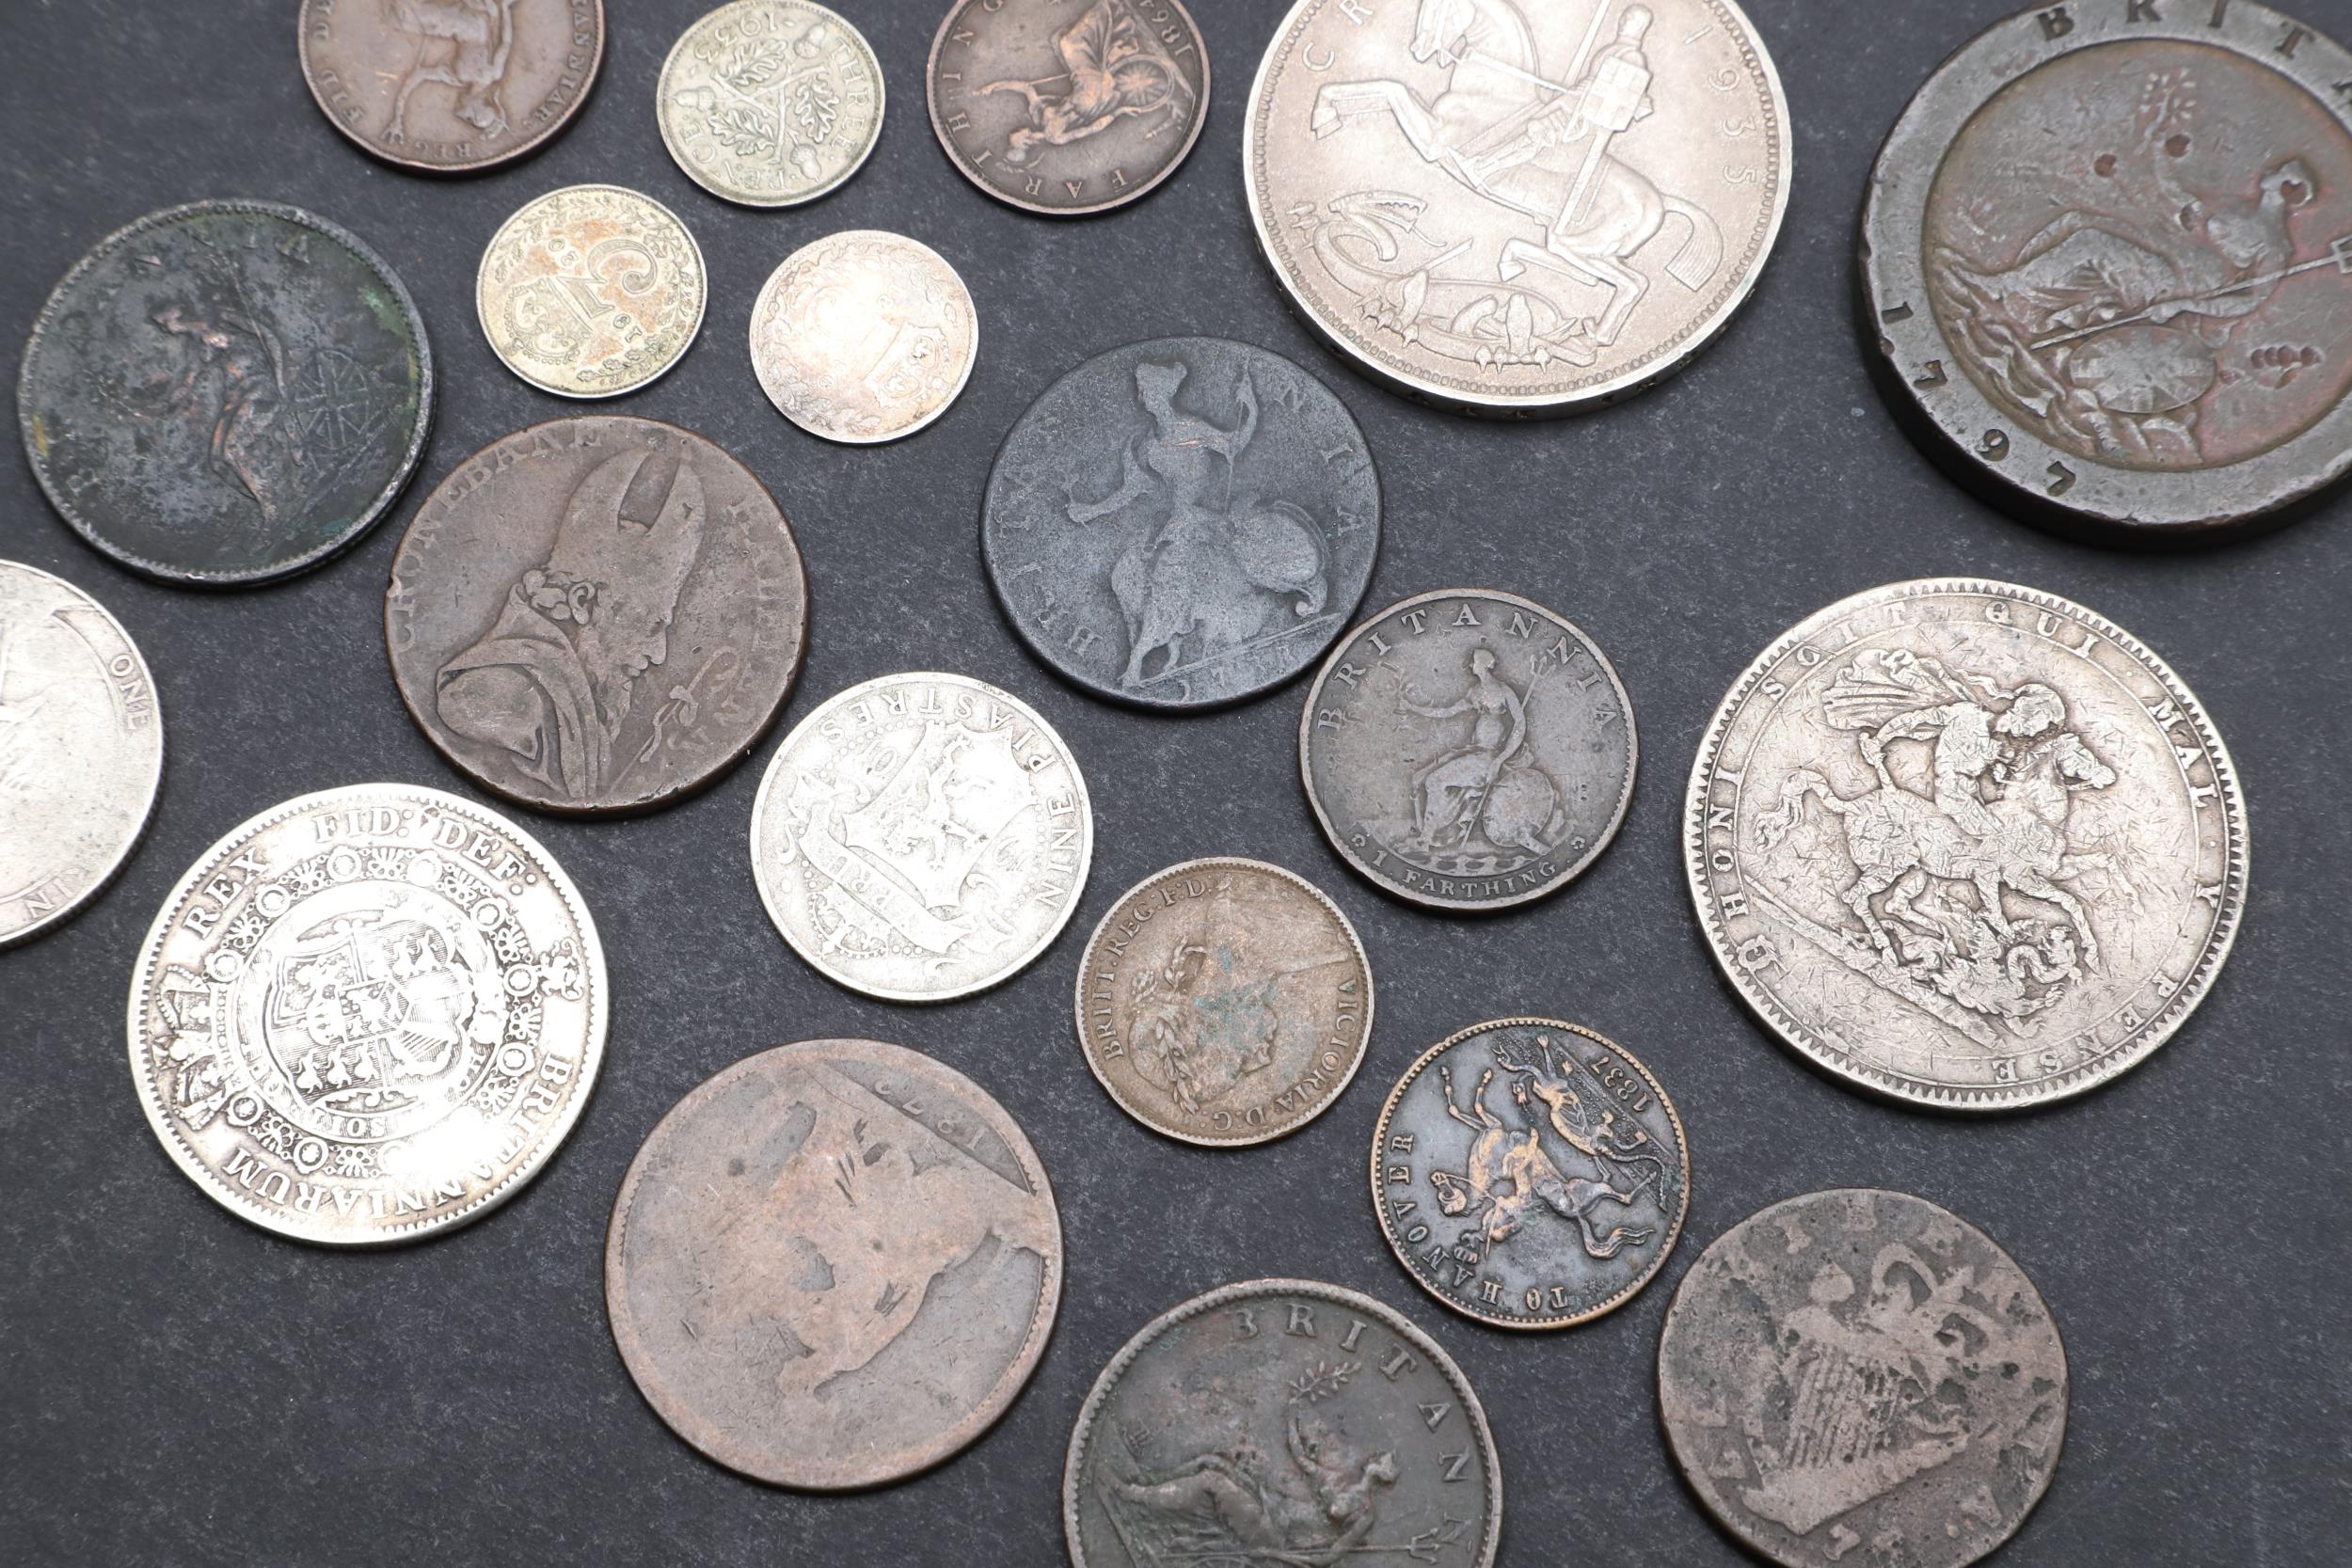 A MIXED COLLECTION OF BRITISH COINS TO INCLUDE 1819 CROWN AND 1797 TWOPENCE. - Image 3 of 3